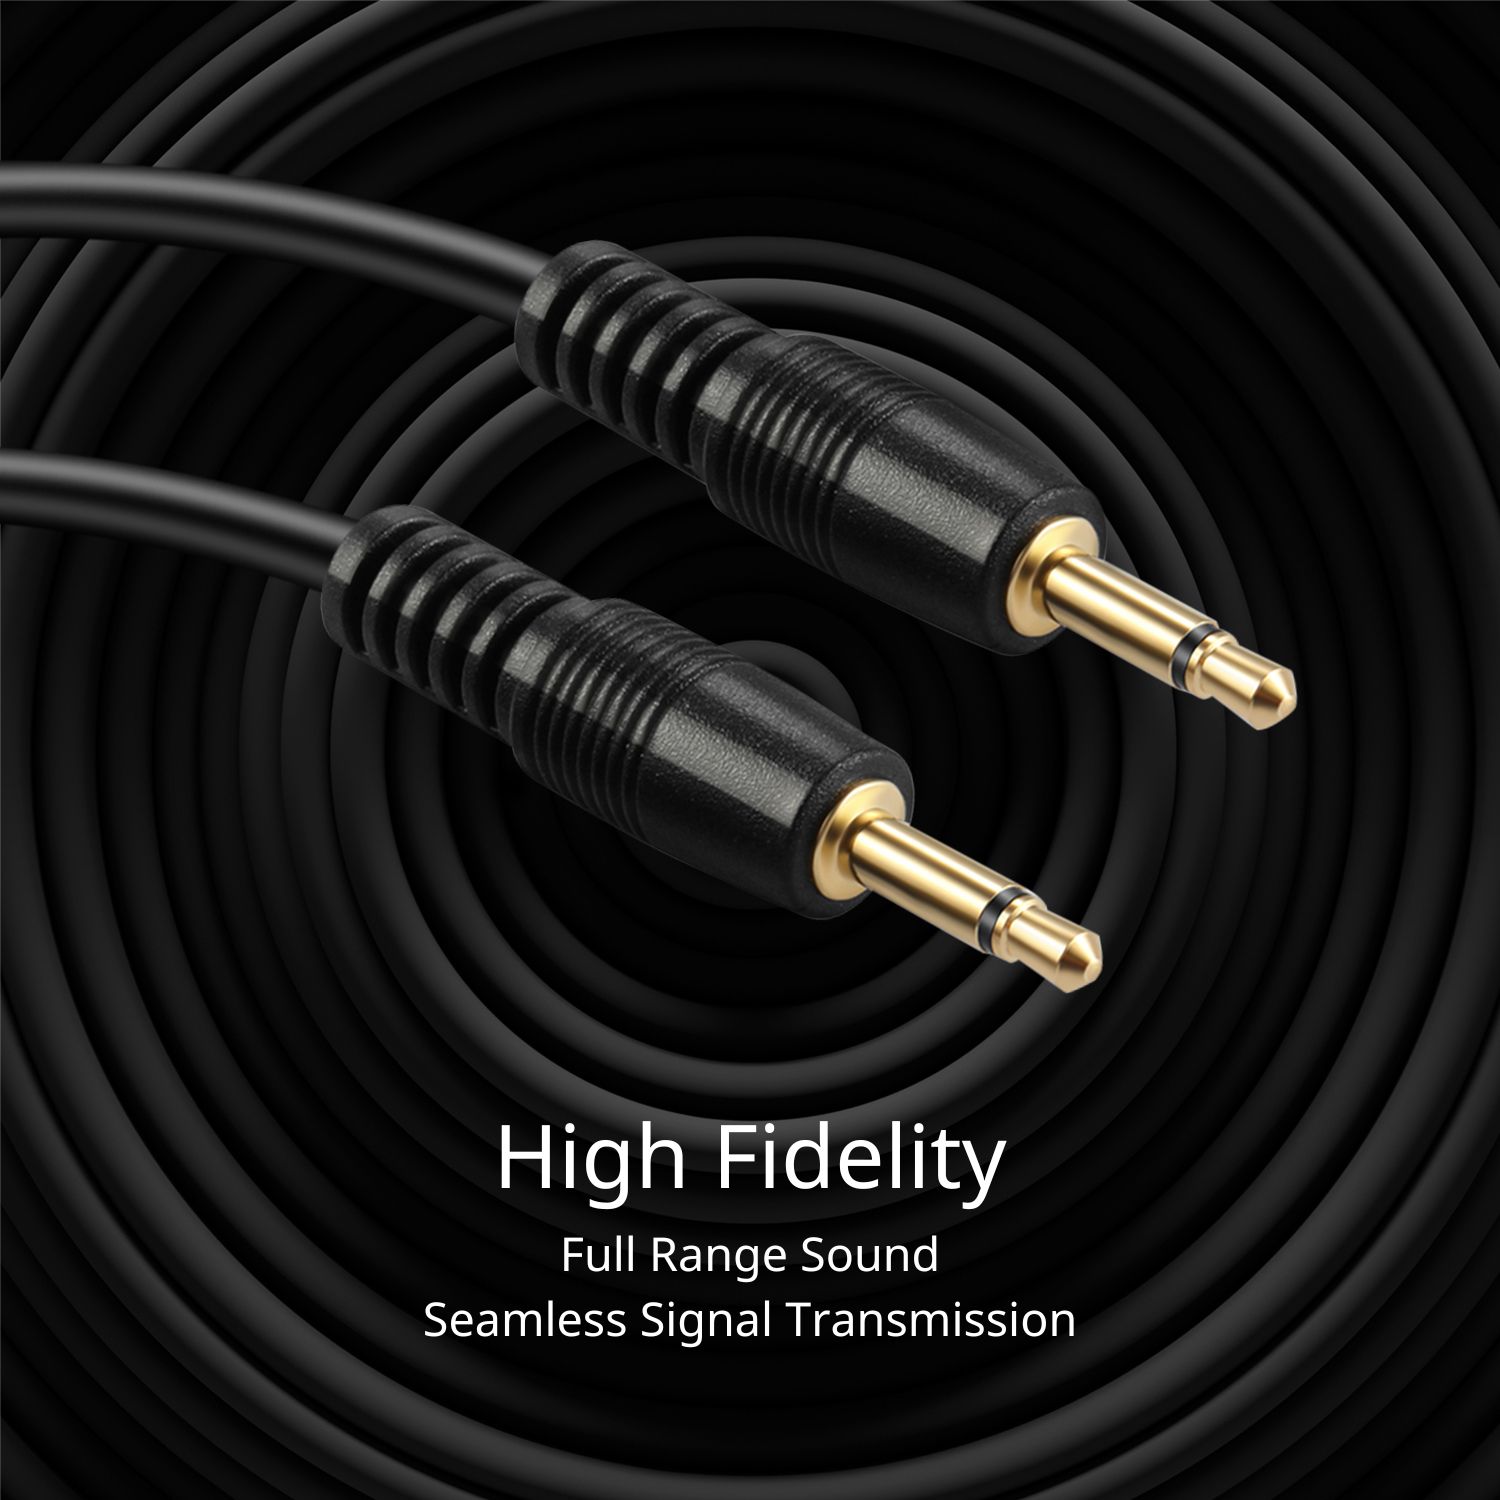 High performance versatile cable accurately transfer quality detailed clean natural pure audio sound with realism and clarity jitter-free mono format signals; Balanced solid conductors for enhanced internal noise rejection and clearer, deeper bass and eliminate strand-interaction distortion